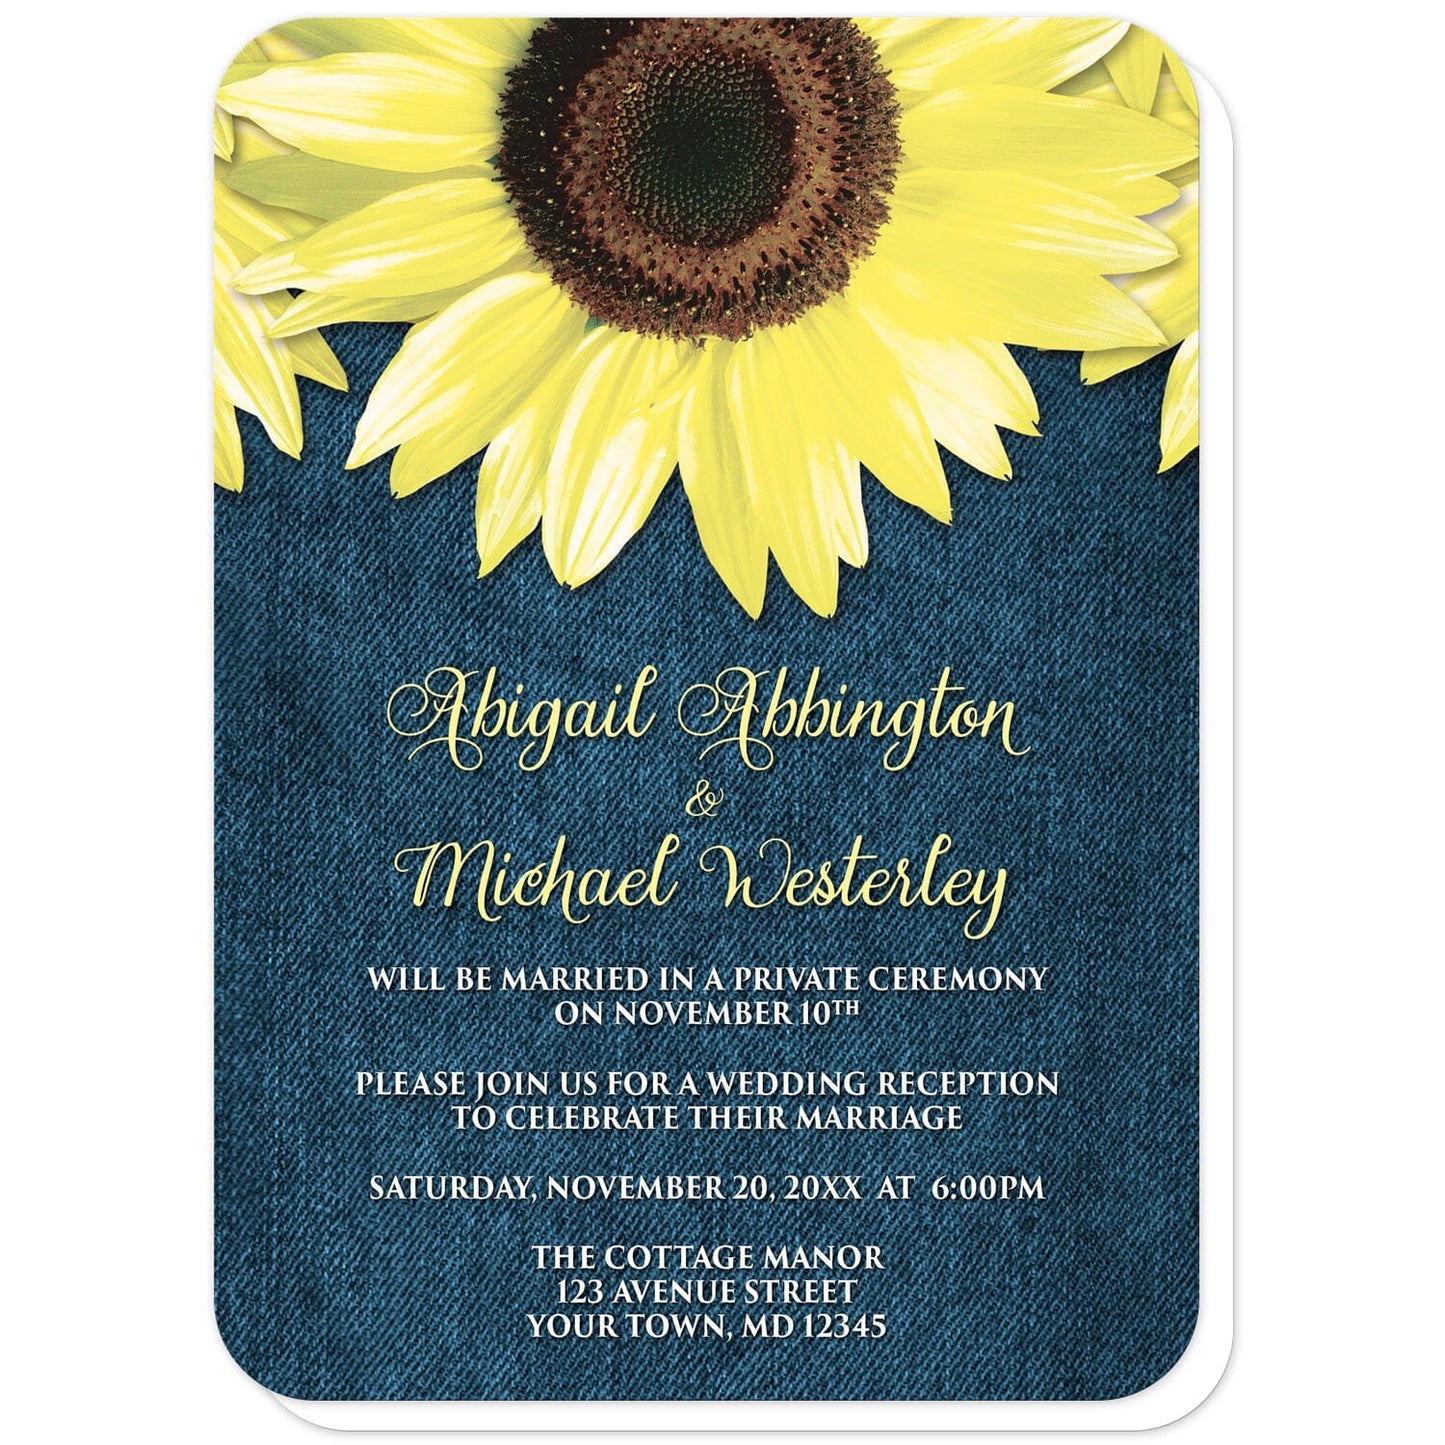 Rustic Sunflower and Denim Reception Only Invitations (with rounded corners) at Artistically Invited. Southern-inspired rustic sunflower and denim reception only invitations designed with large yellow sunflowers along the top over a country blue denim design. Your personalized post-wedding reception details are custom printed in yellow and white over the blue denim background below the pretty sunflowers. 